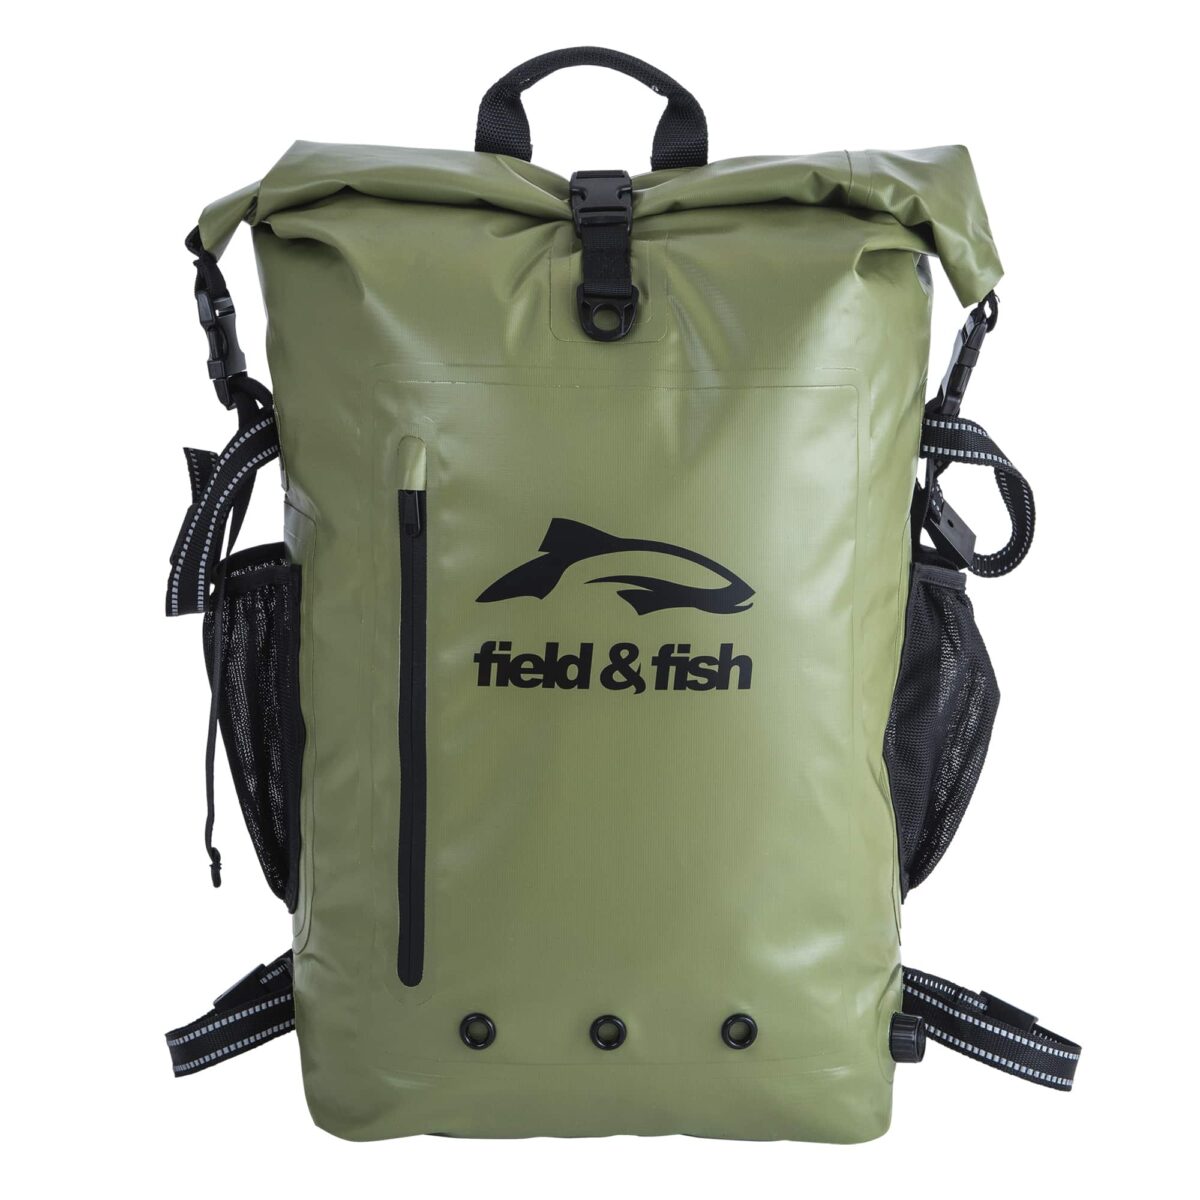 40L waterproof backpack with front closure